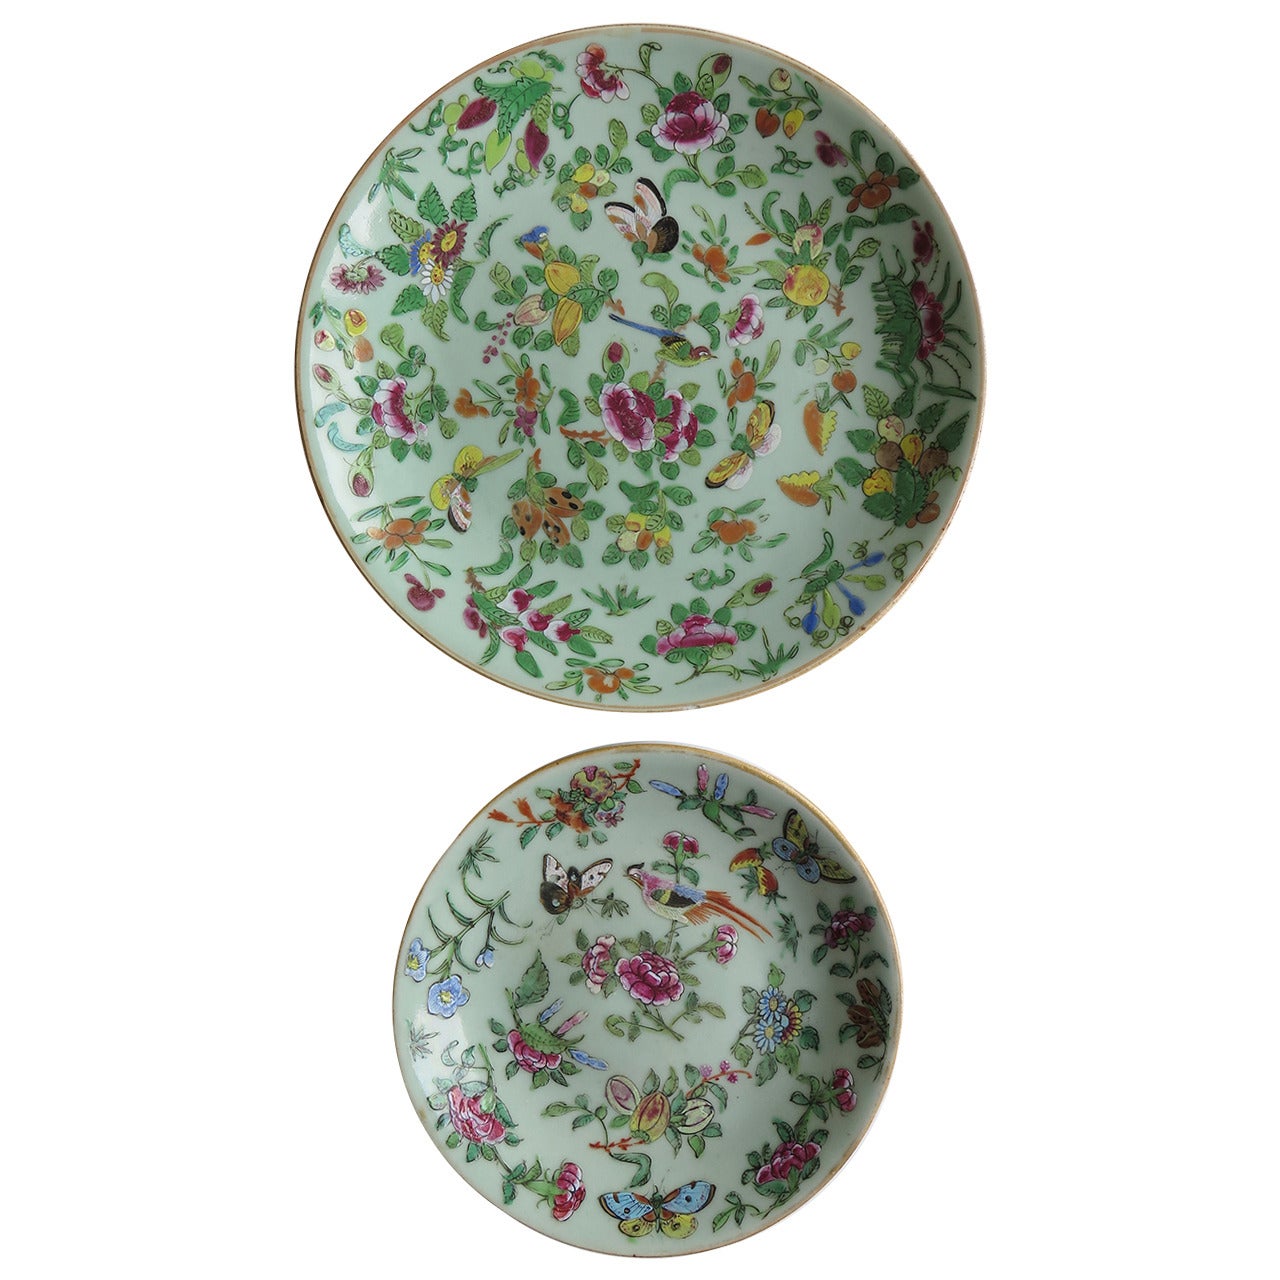 TWO, 19th C. Chinese Export, Porcelain PLATES, Hand-Painted Decoration, Qing